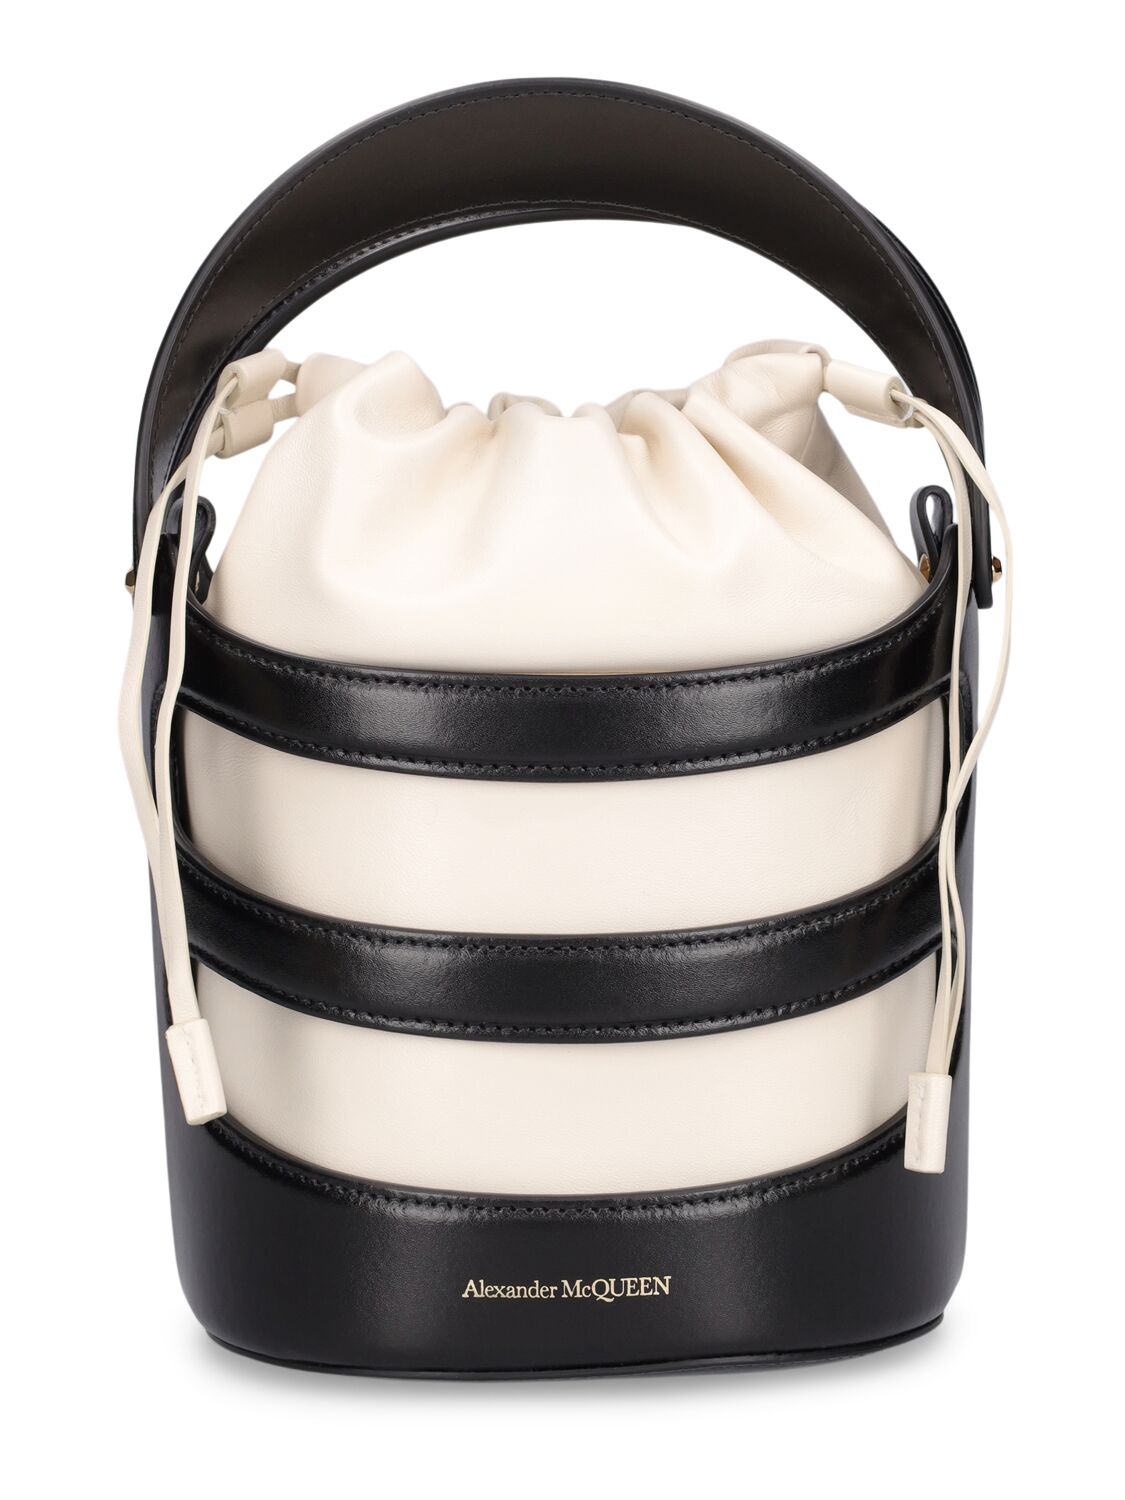 Alexander Mcqueen The Rise Leather Bucket Bag In Black,ivory